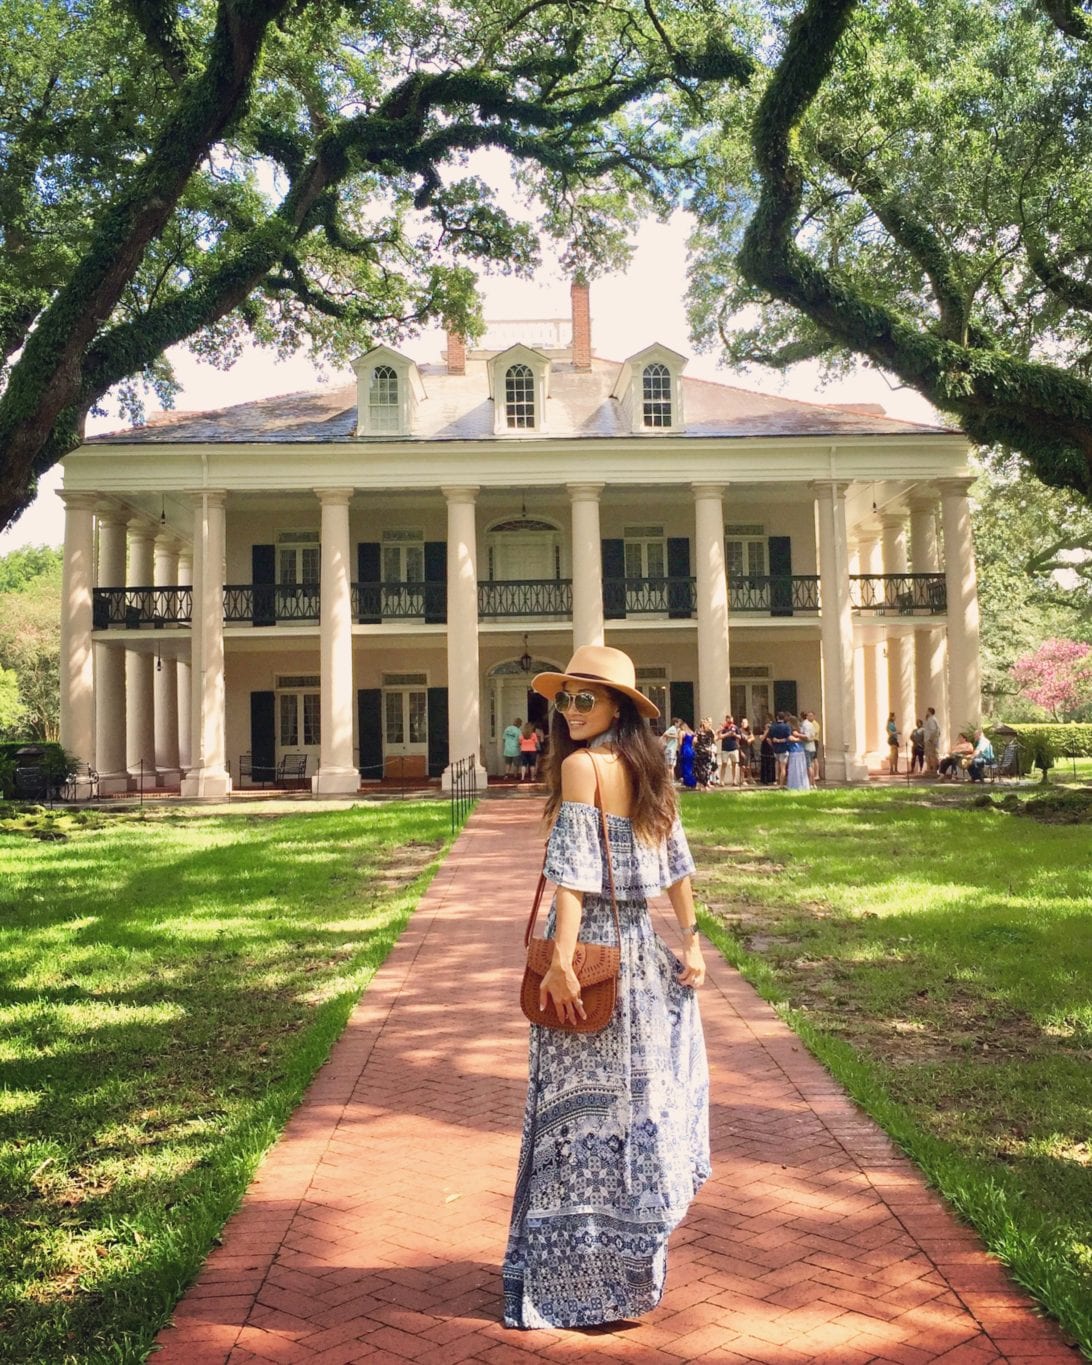 oak alley plantation, things to do in new orleans, visit new orleans, plantations